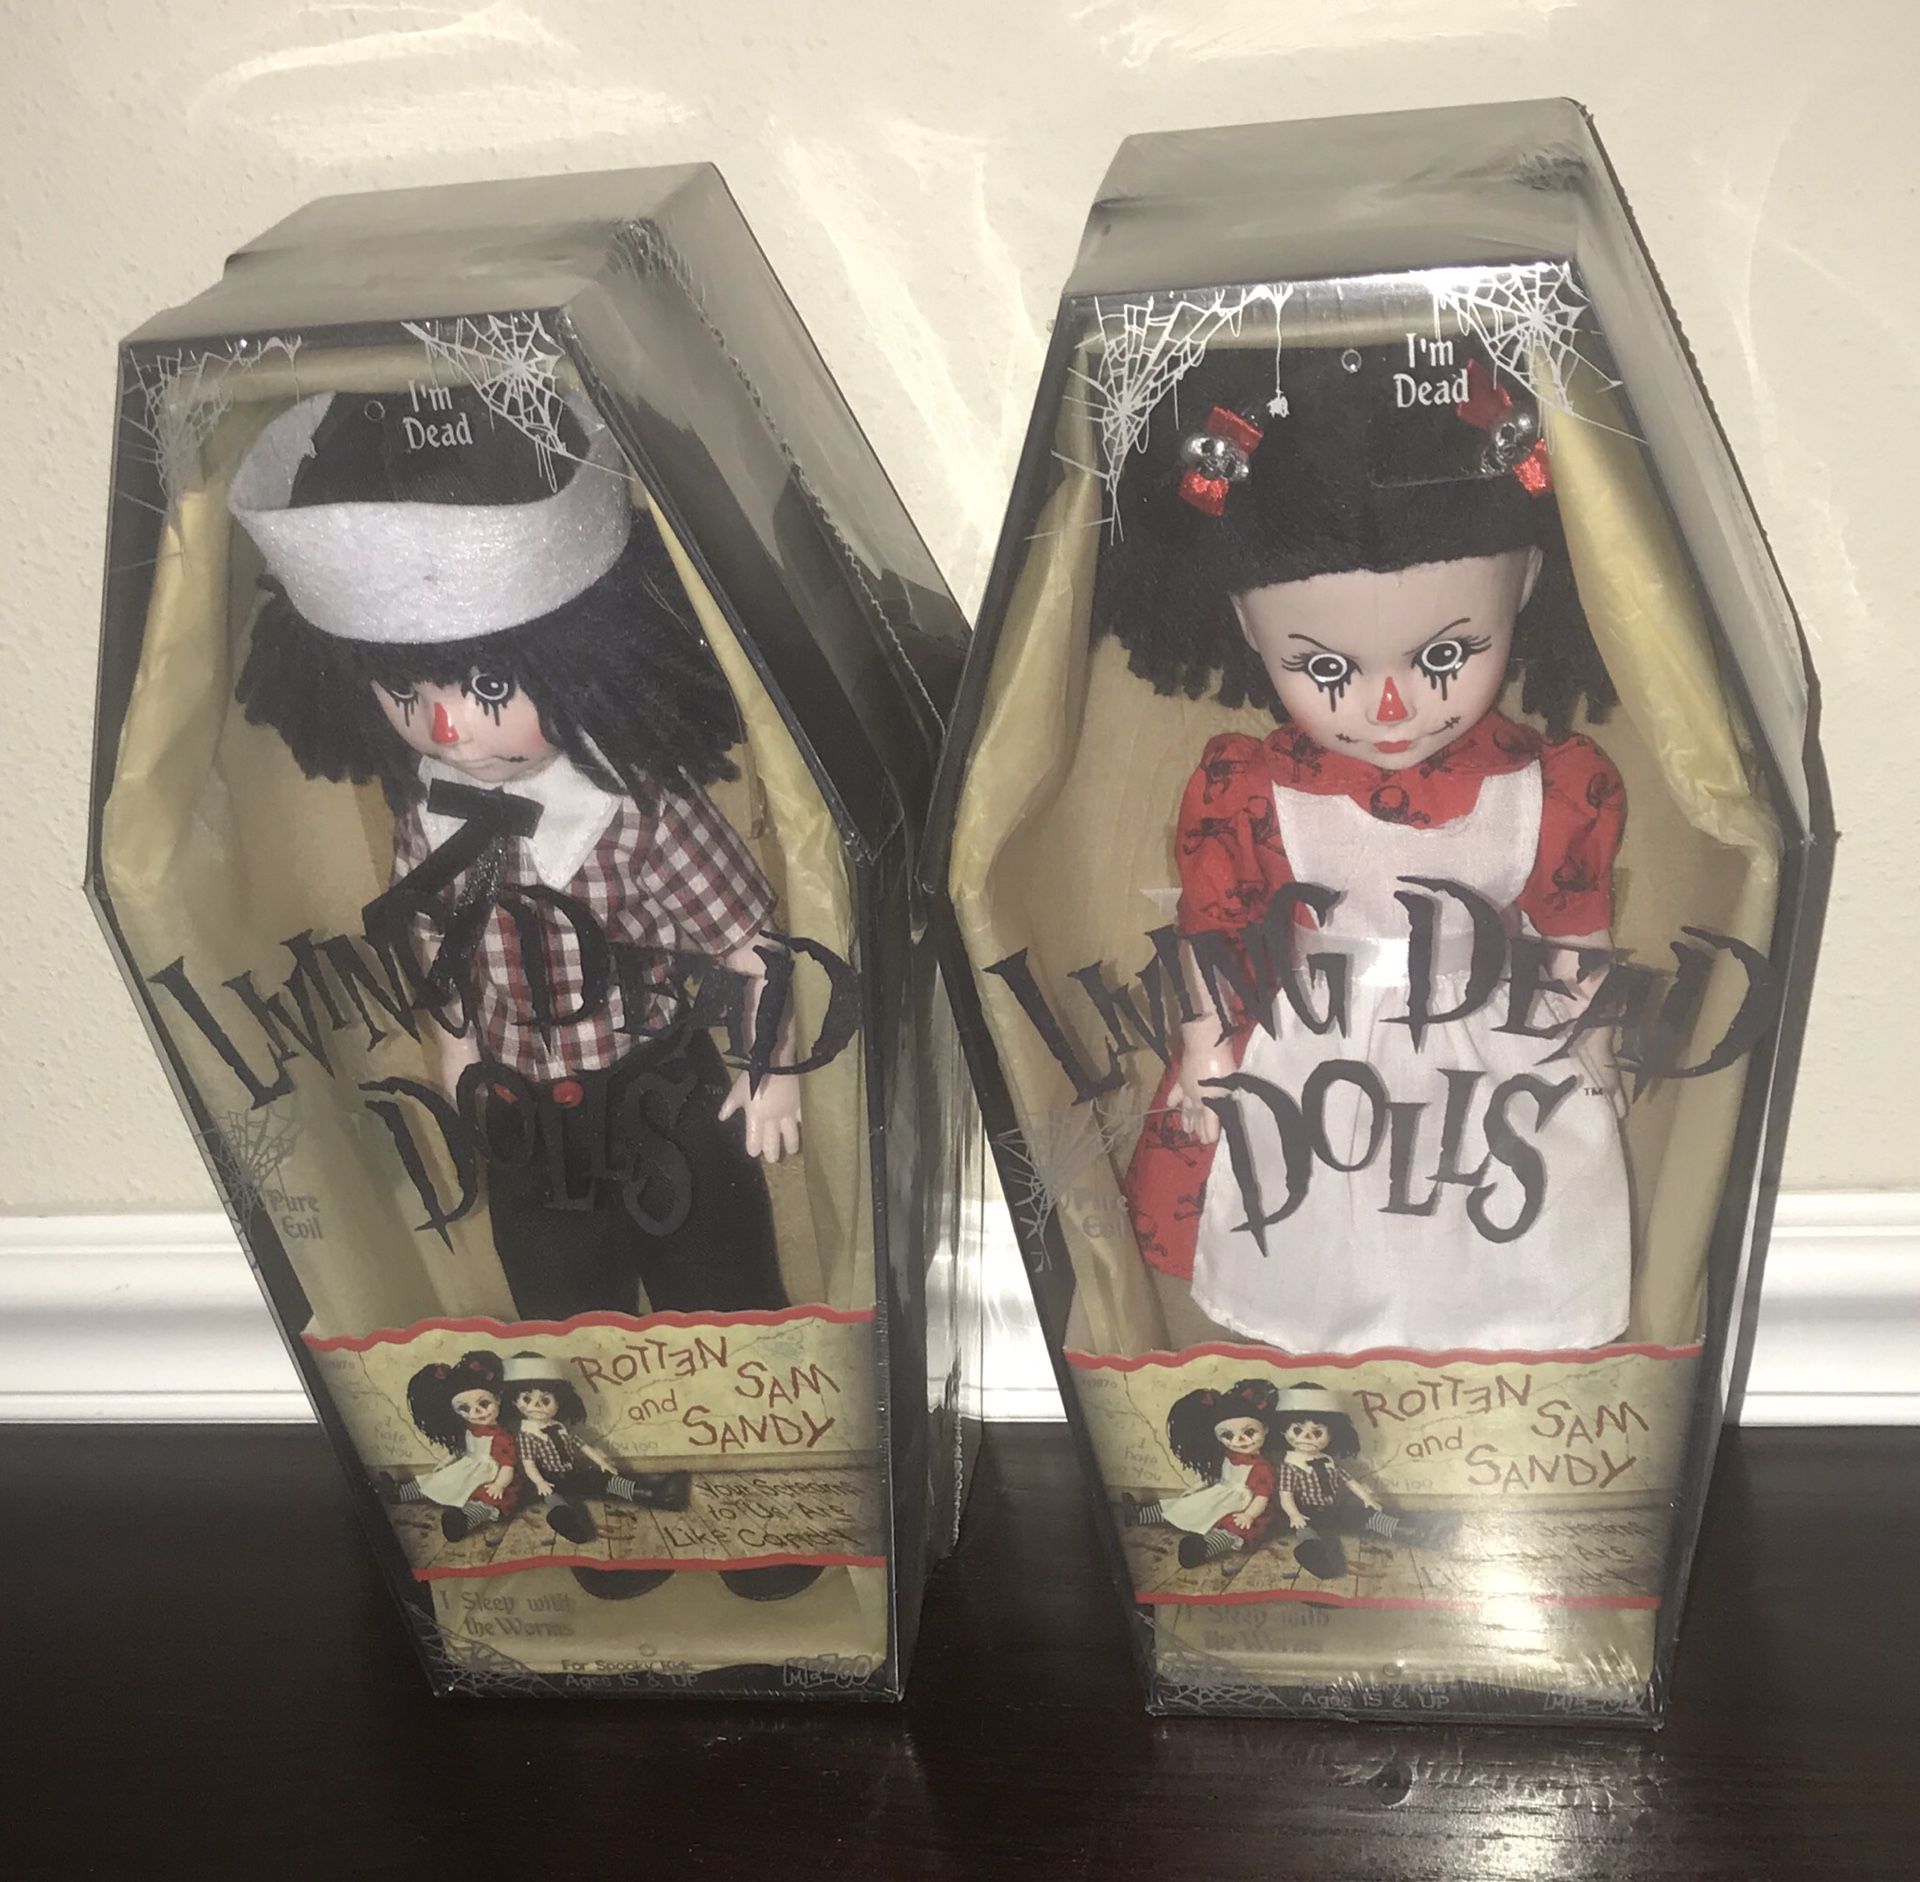 New Living Dead Doll Rotten Sam and Sandy Firm $75 “ Raggedy Anne and Andy